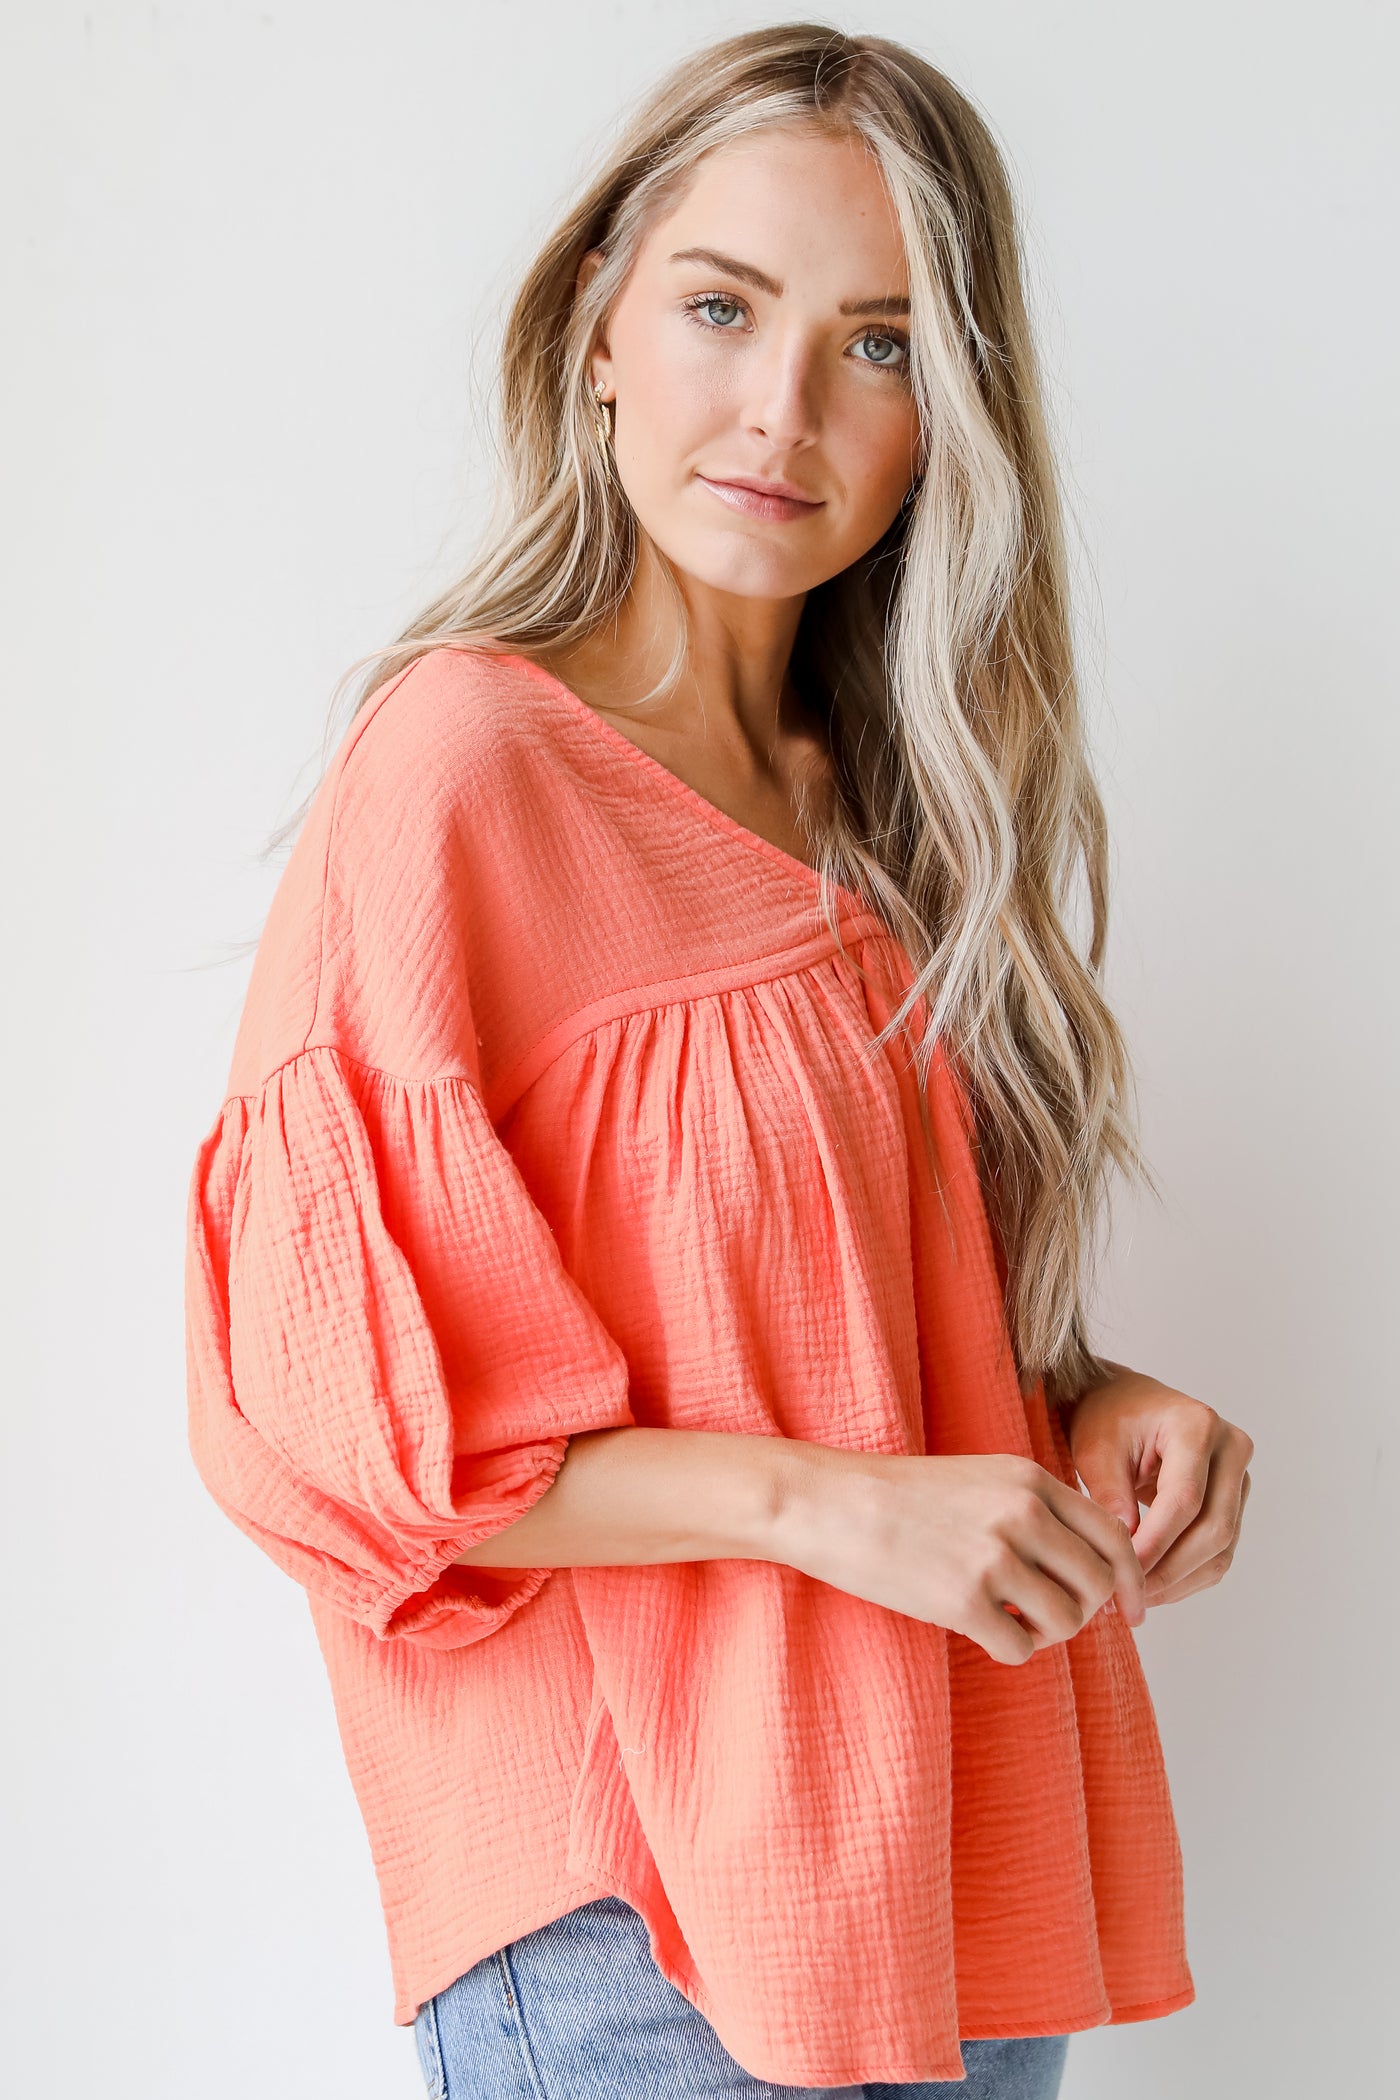 Linen Babydoll Blouse in coral side view